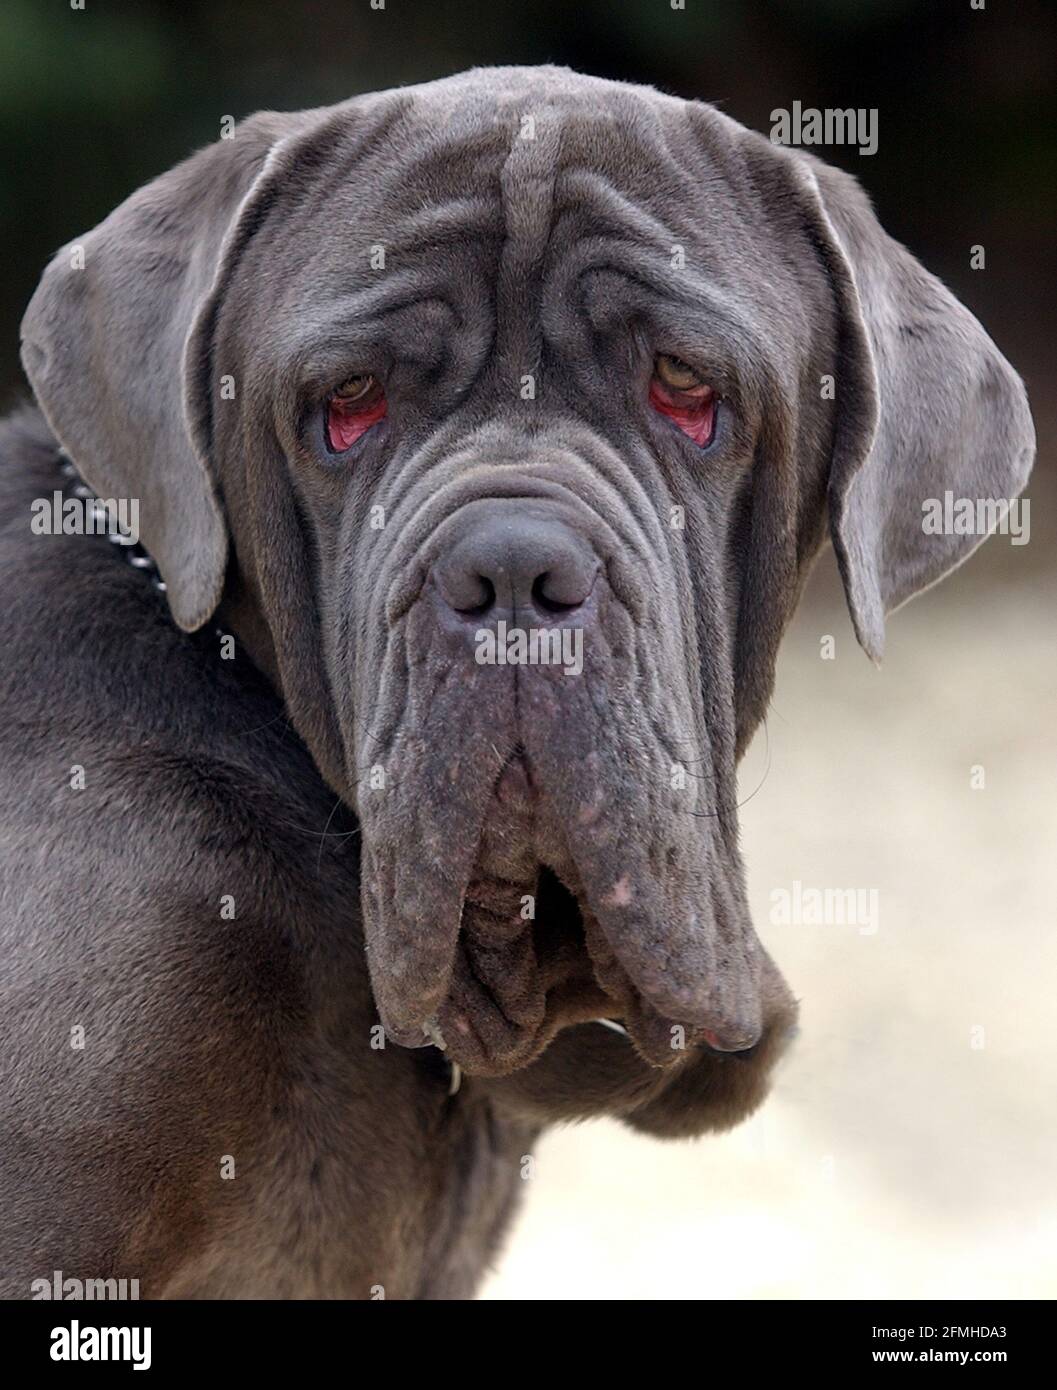 2 YEAR OLD STRAY PIERRE, A NEOPOLITAN MASTIFF WAS FOUND WANDERING THE STREETS OF OXFORD AND TAKEN TO THE ARDLEY RESCUE KENNELS IS IN DESPERATE NEED OF AN OPERATION TO REPAIR A SEVERED LIGAMENT. THE KENNELS ARE TRYING TO RAISE THE £1,500 NECESSARY FOR THE OPERATION. PIC MIKE WALKER, 2003 Stock Photo